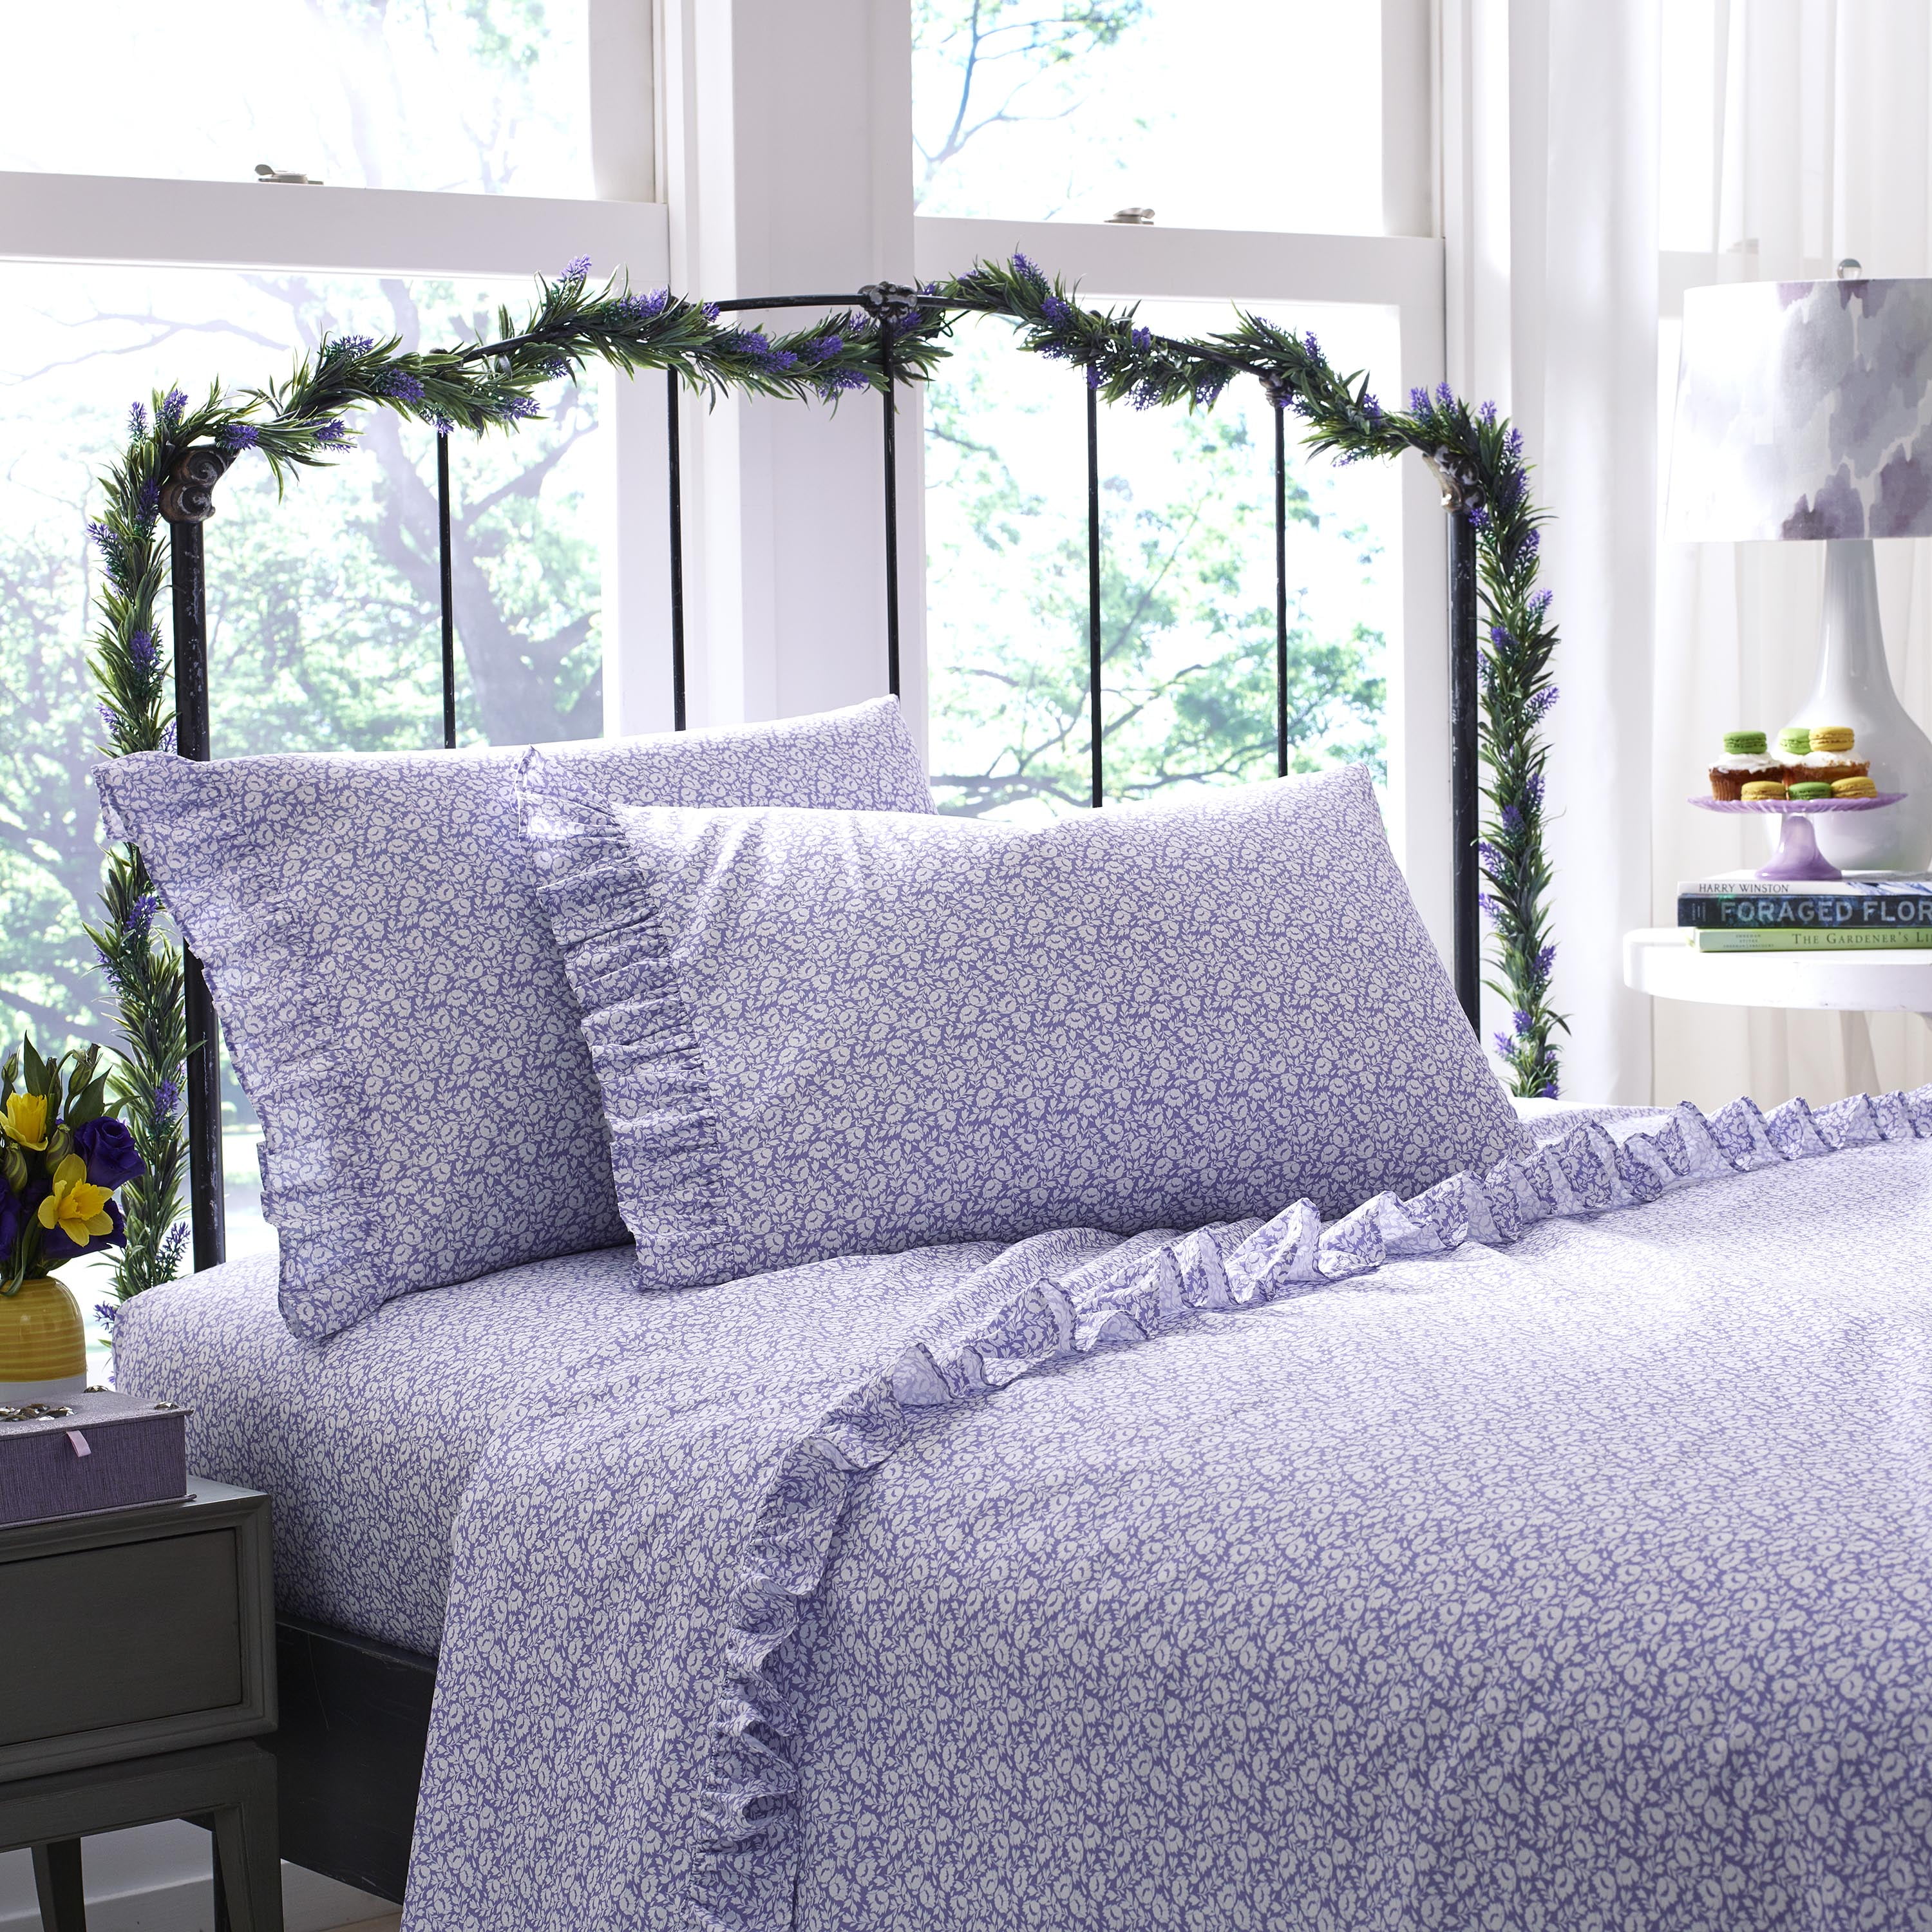 Details about   Cozy Bedding Collection Lavender Striped 1200TC Egyptian Cotton UK All Size 